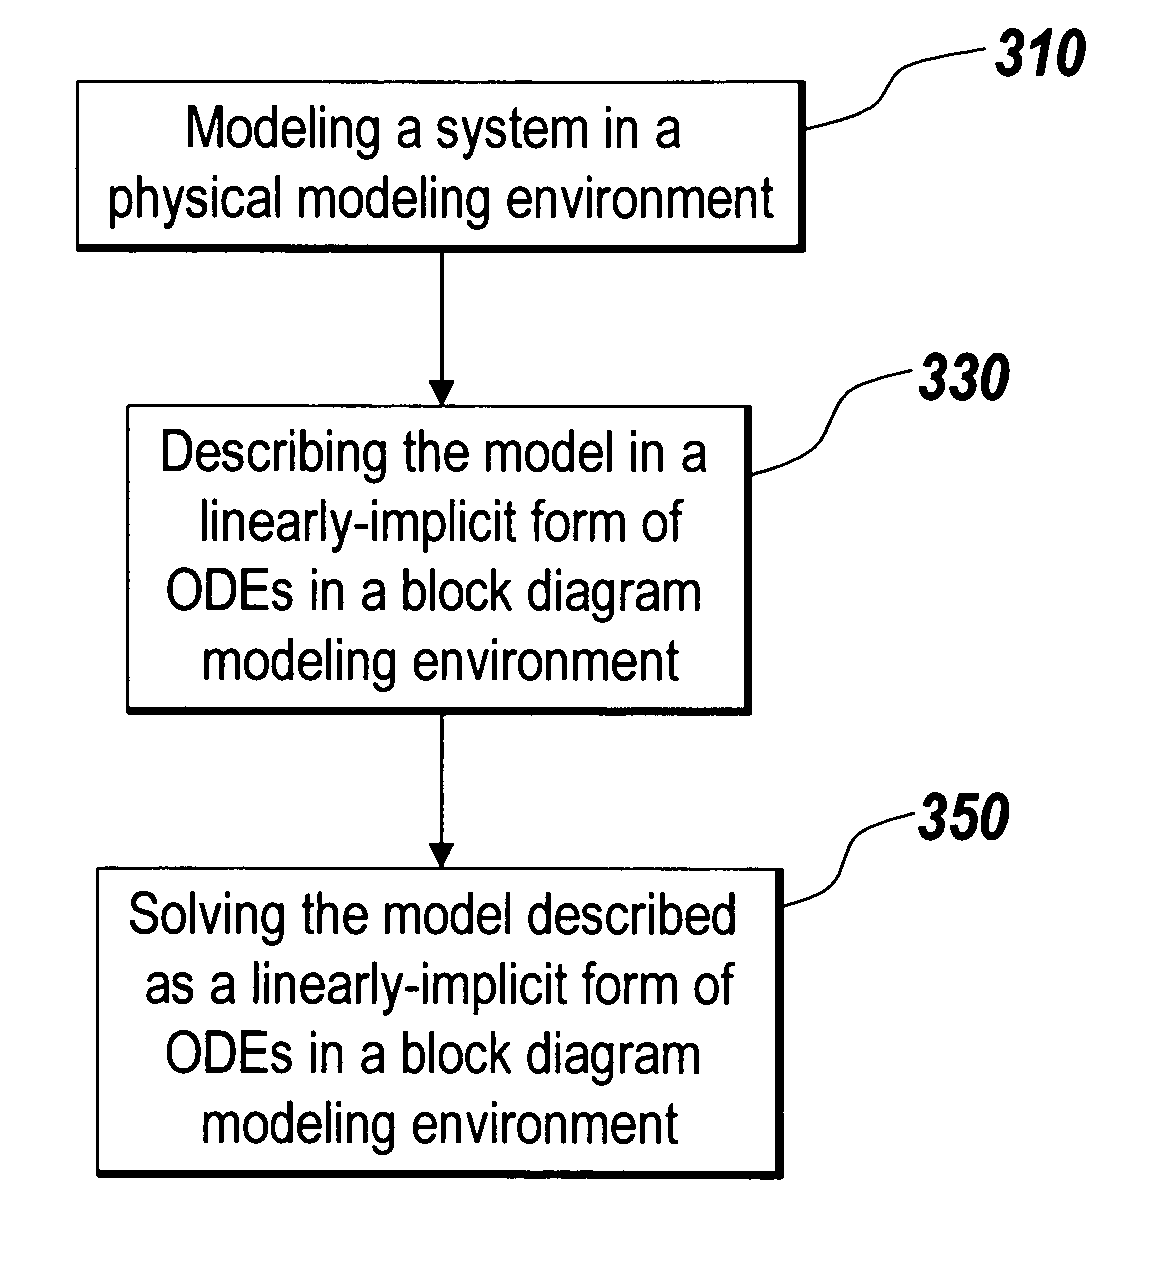 Modeling linearly-implicit systems in block diagram modeling environments